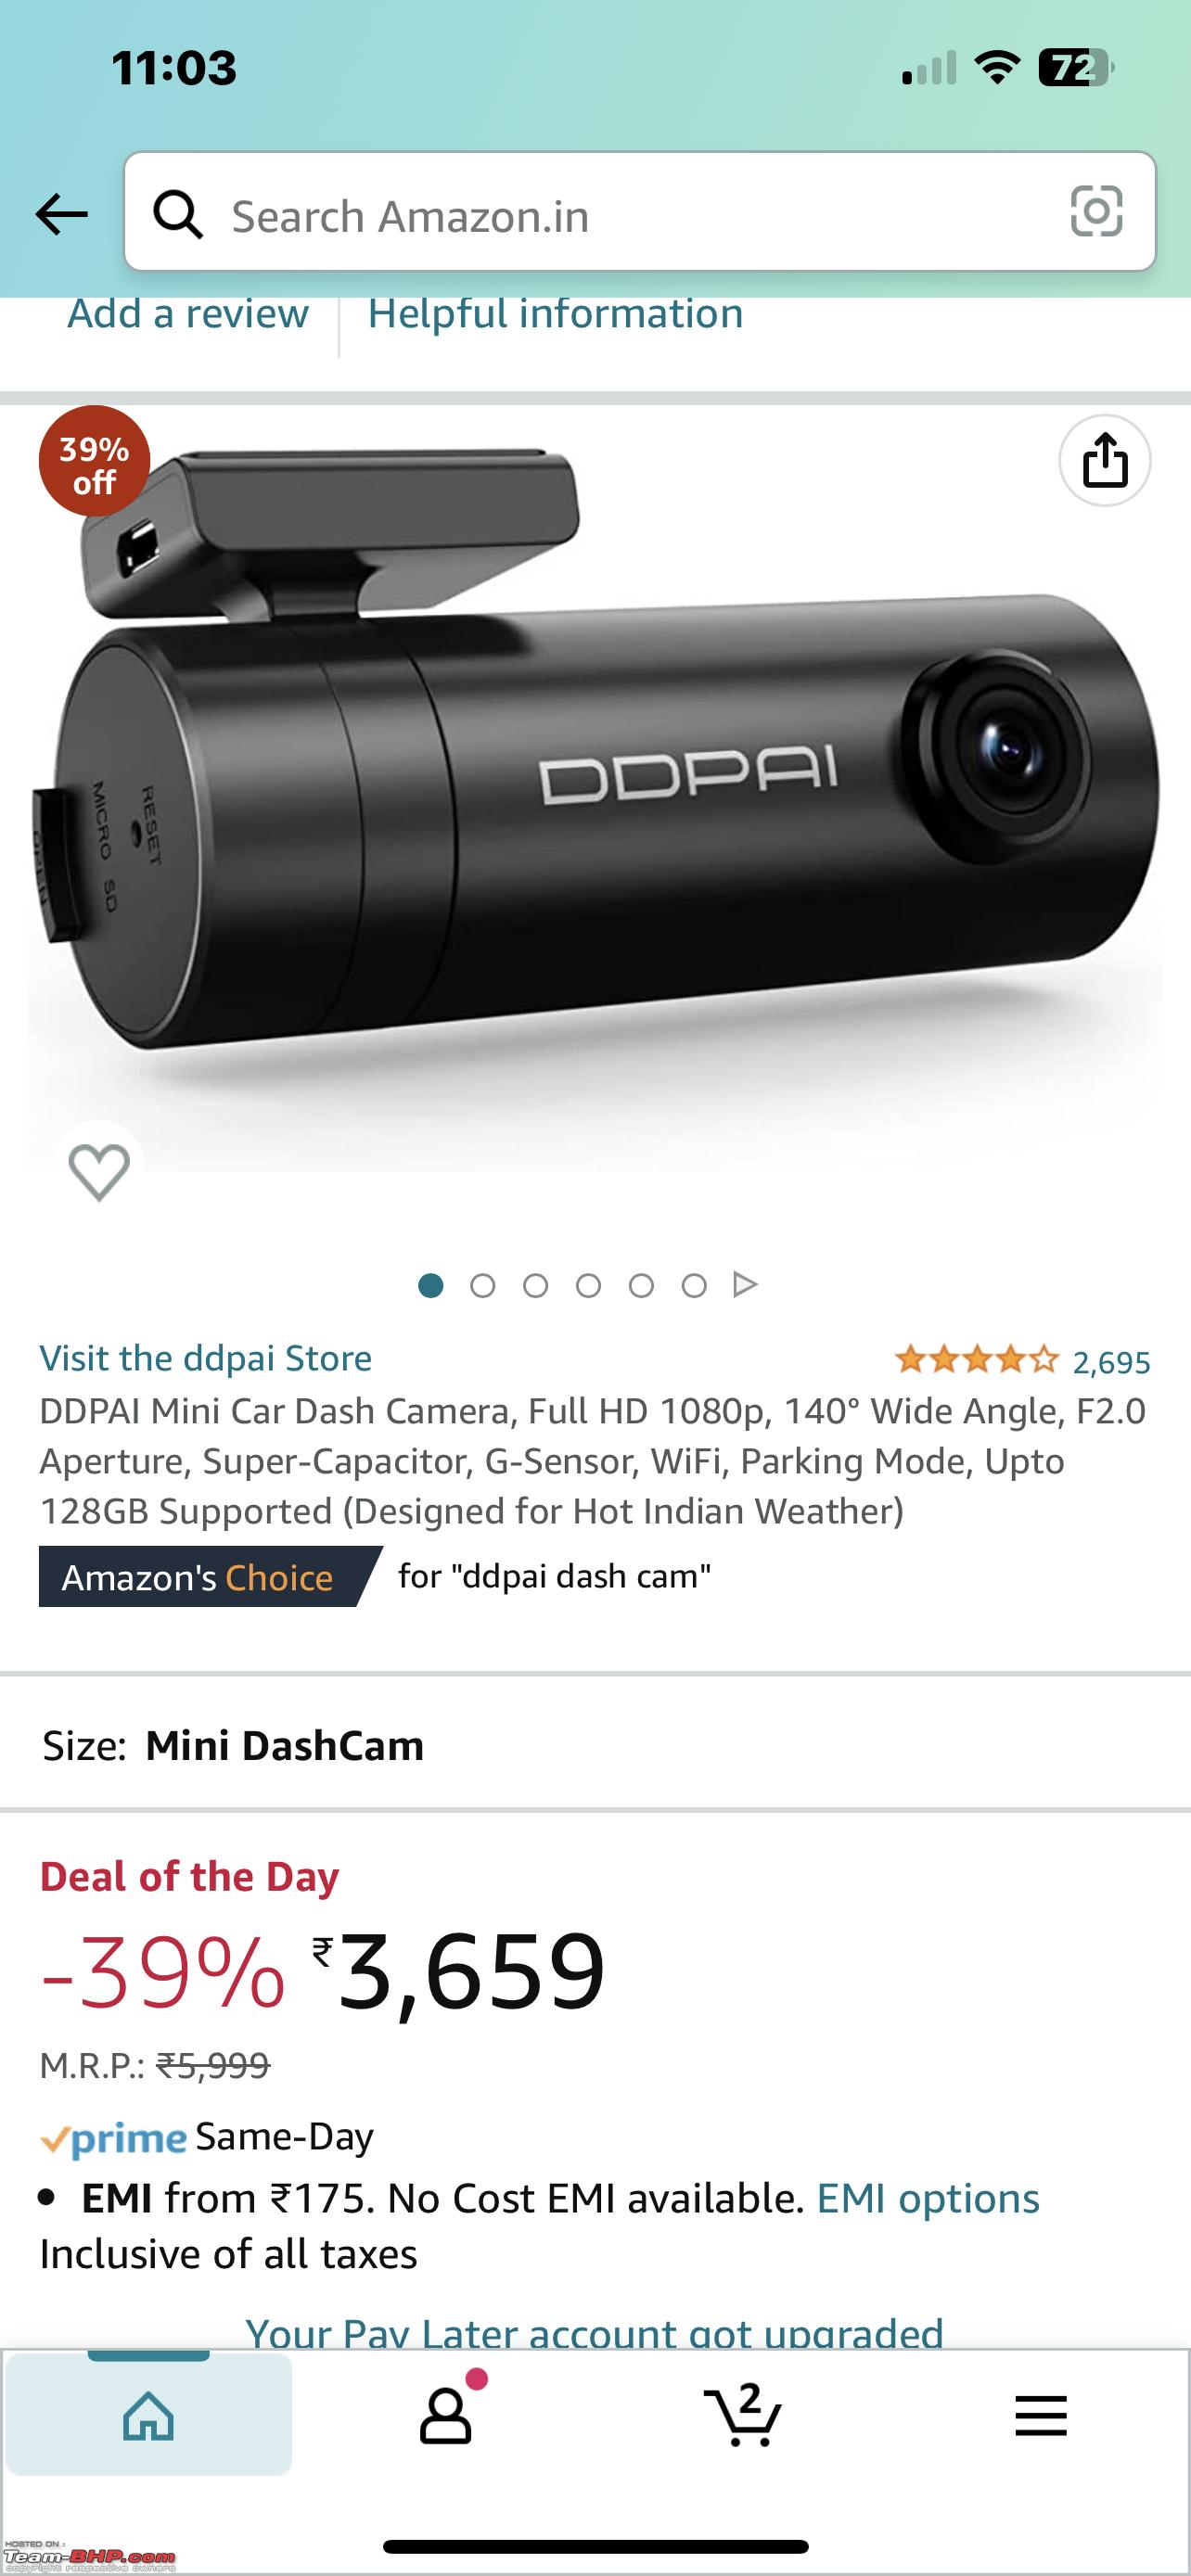 The Dash Cam Your Car Needs - DDPAI Mini Pro review 